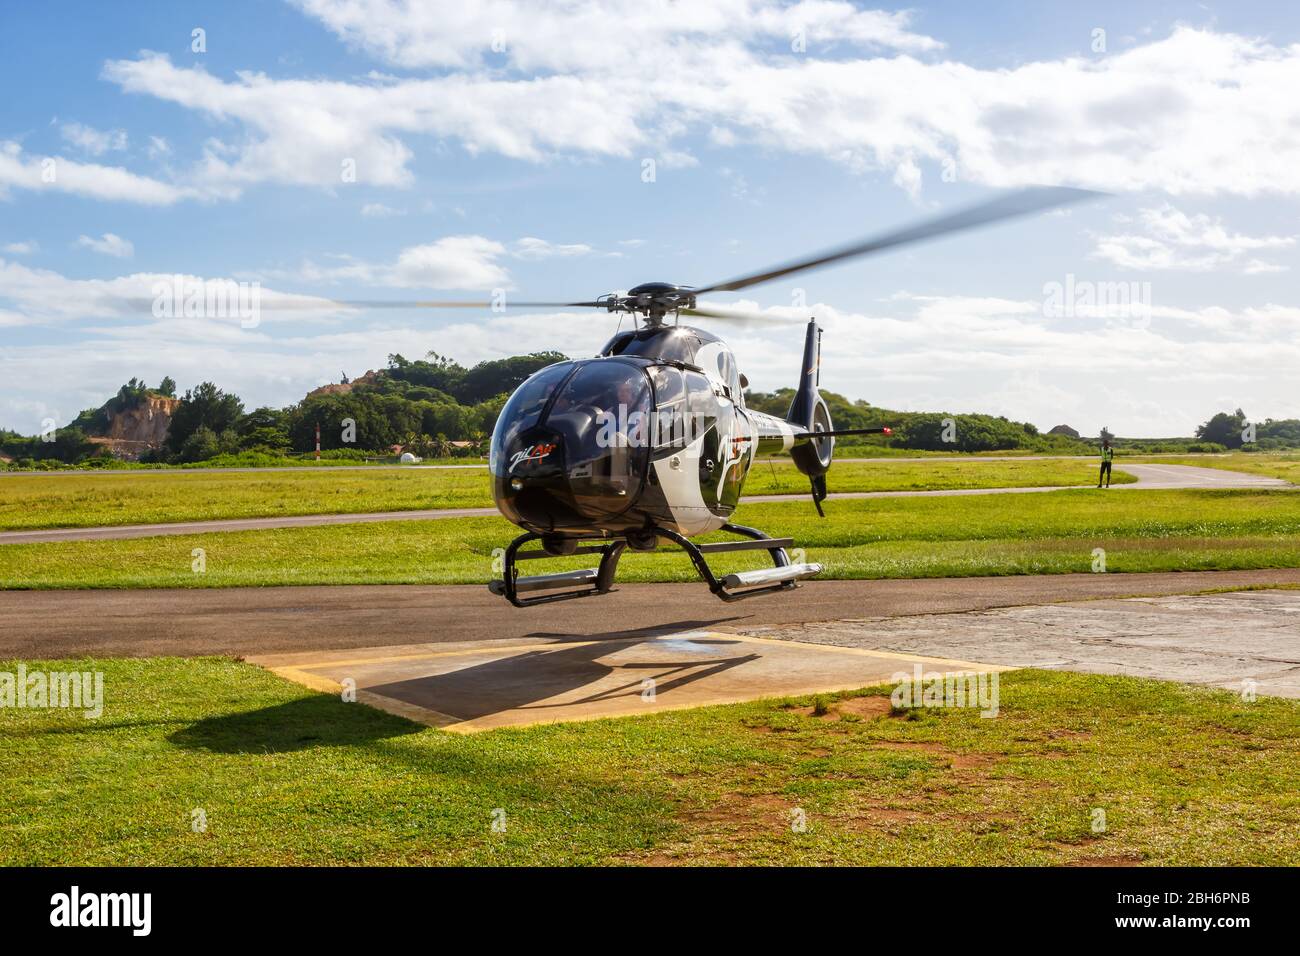 Mahe, Seychelles – February 8, 2020: Zil Air Airbus H120 helicopter at Mahe airport (SEZ) in the Seychelles. Stock Photo